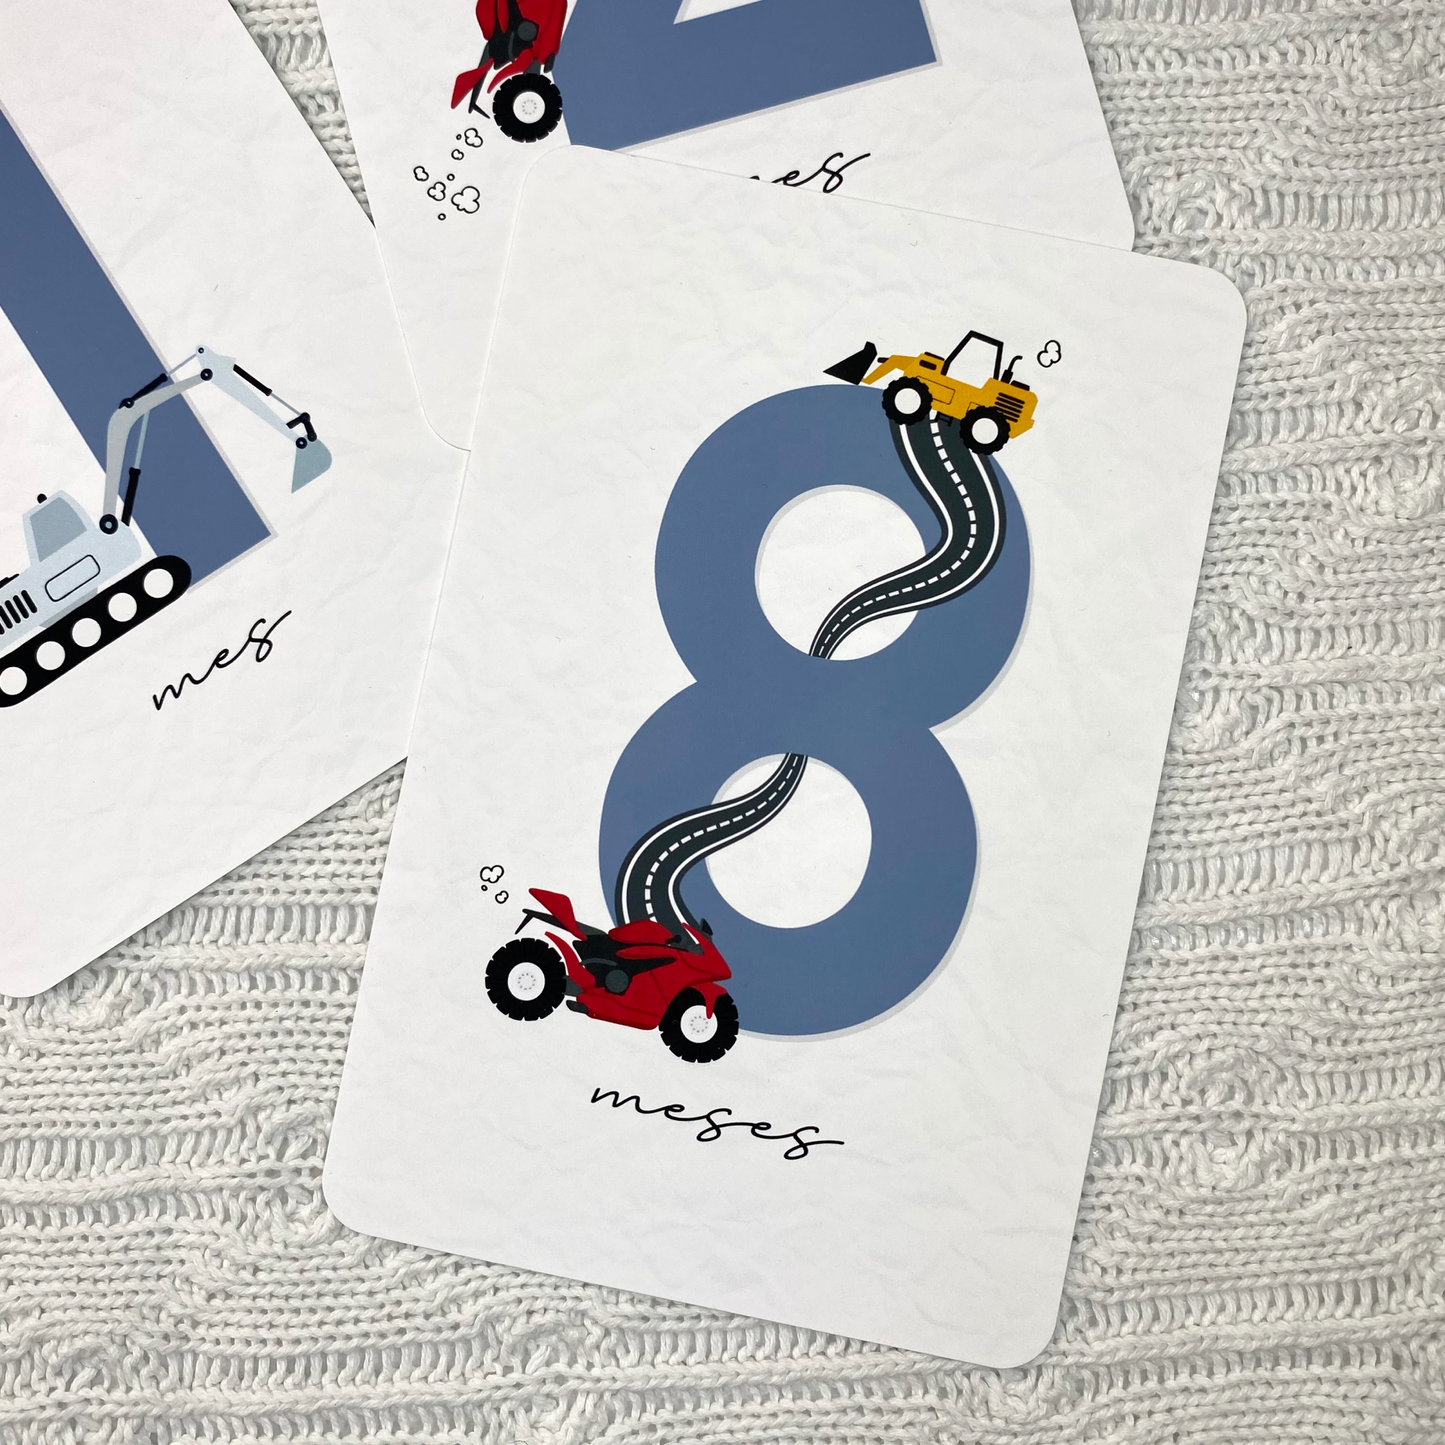 Cars Monthly Milestone Cards